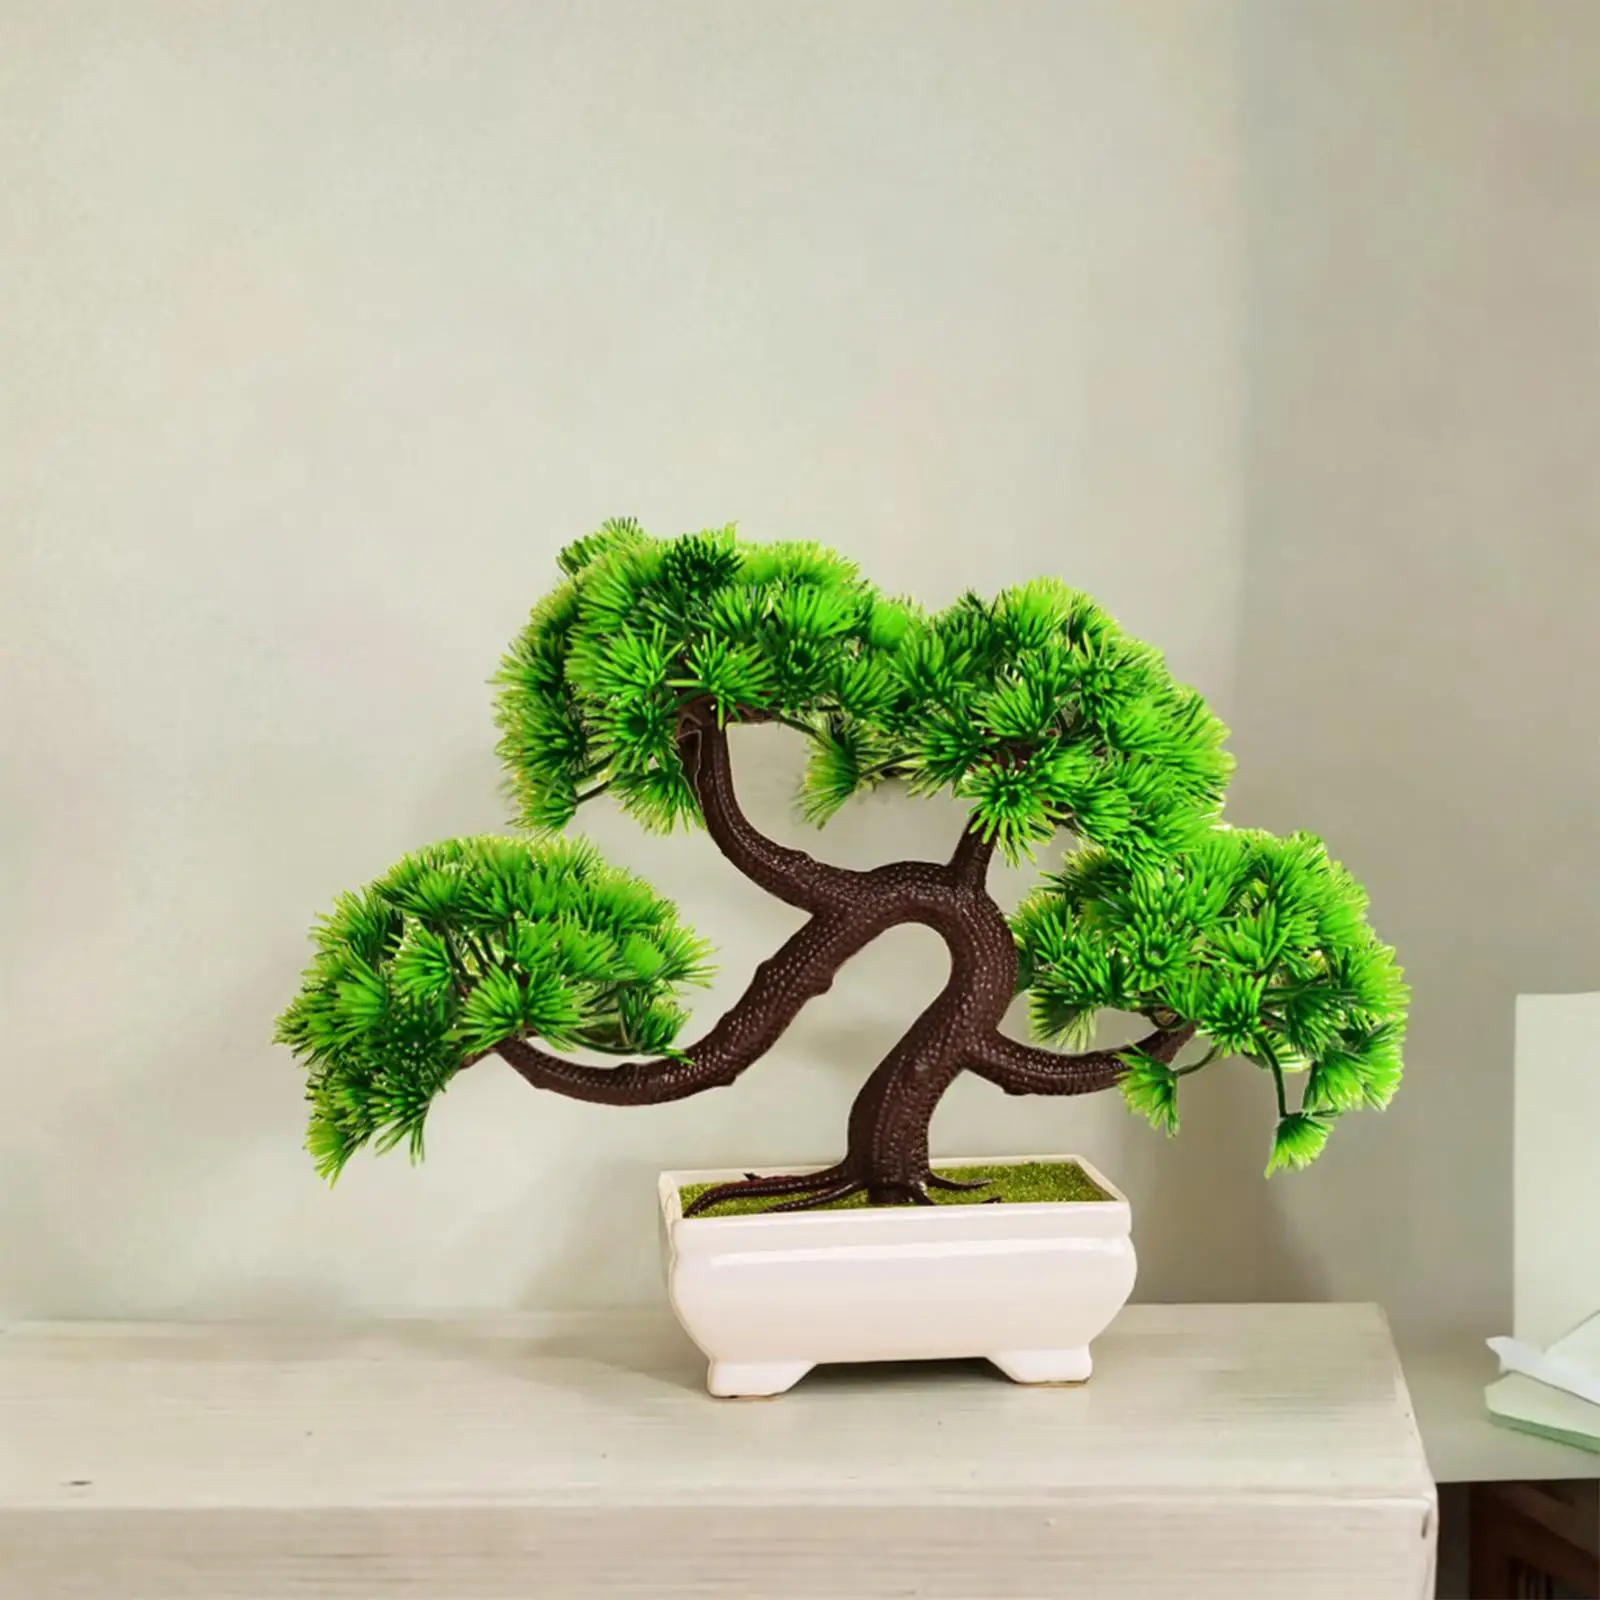 Artificial Bonsai Tree Artificial Potted Green Plants Desk Display Fake Tree for Living Room Table Office Home Windowsill